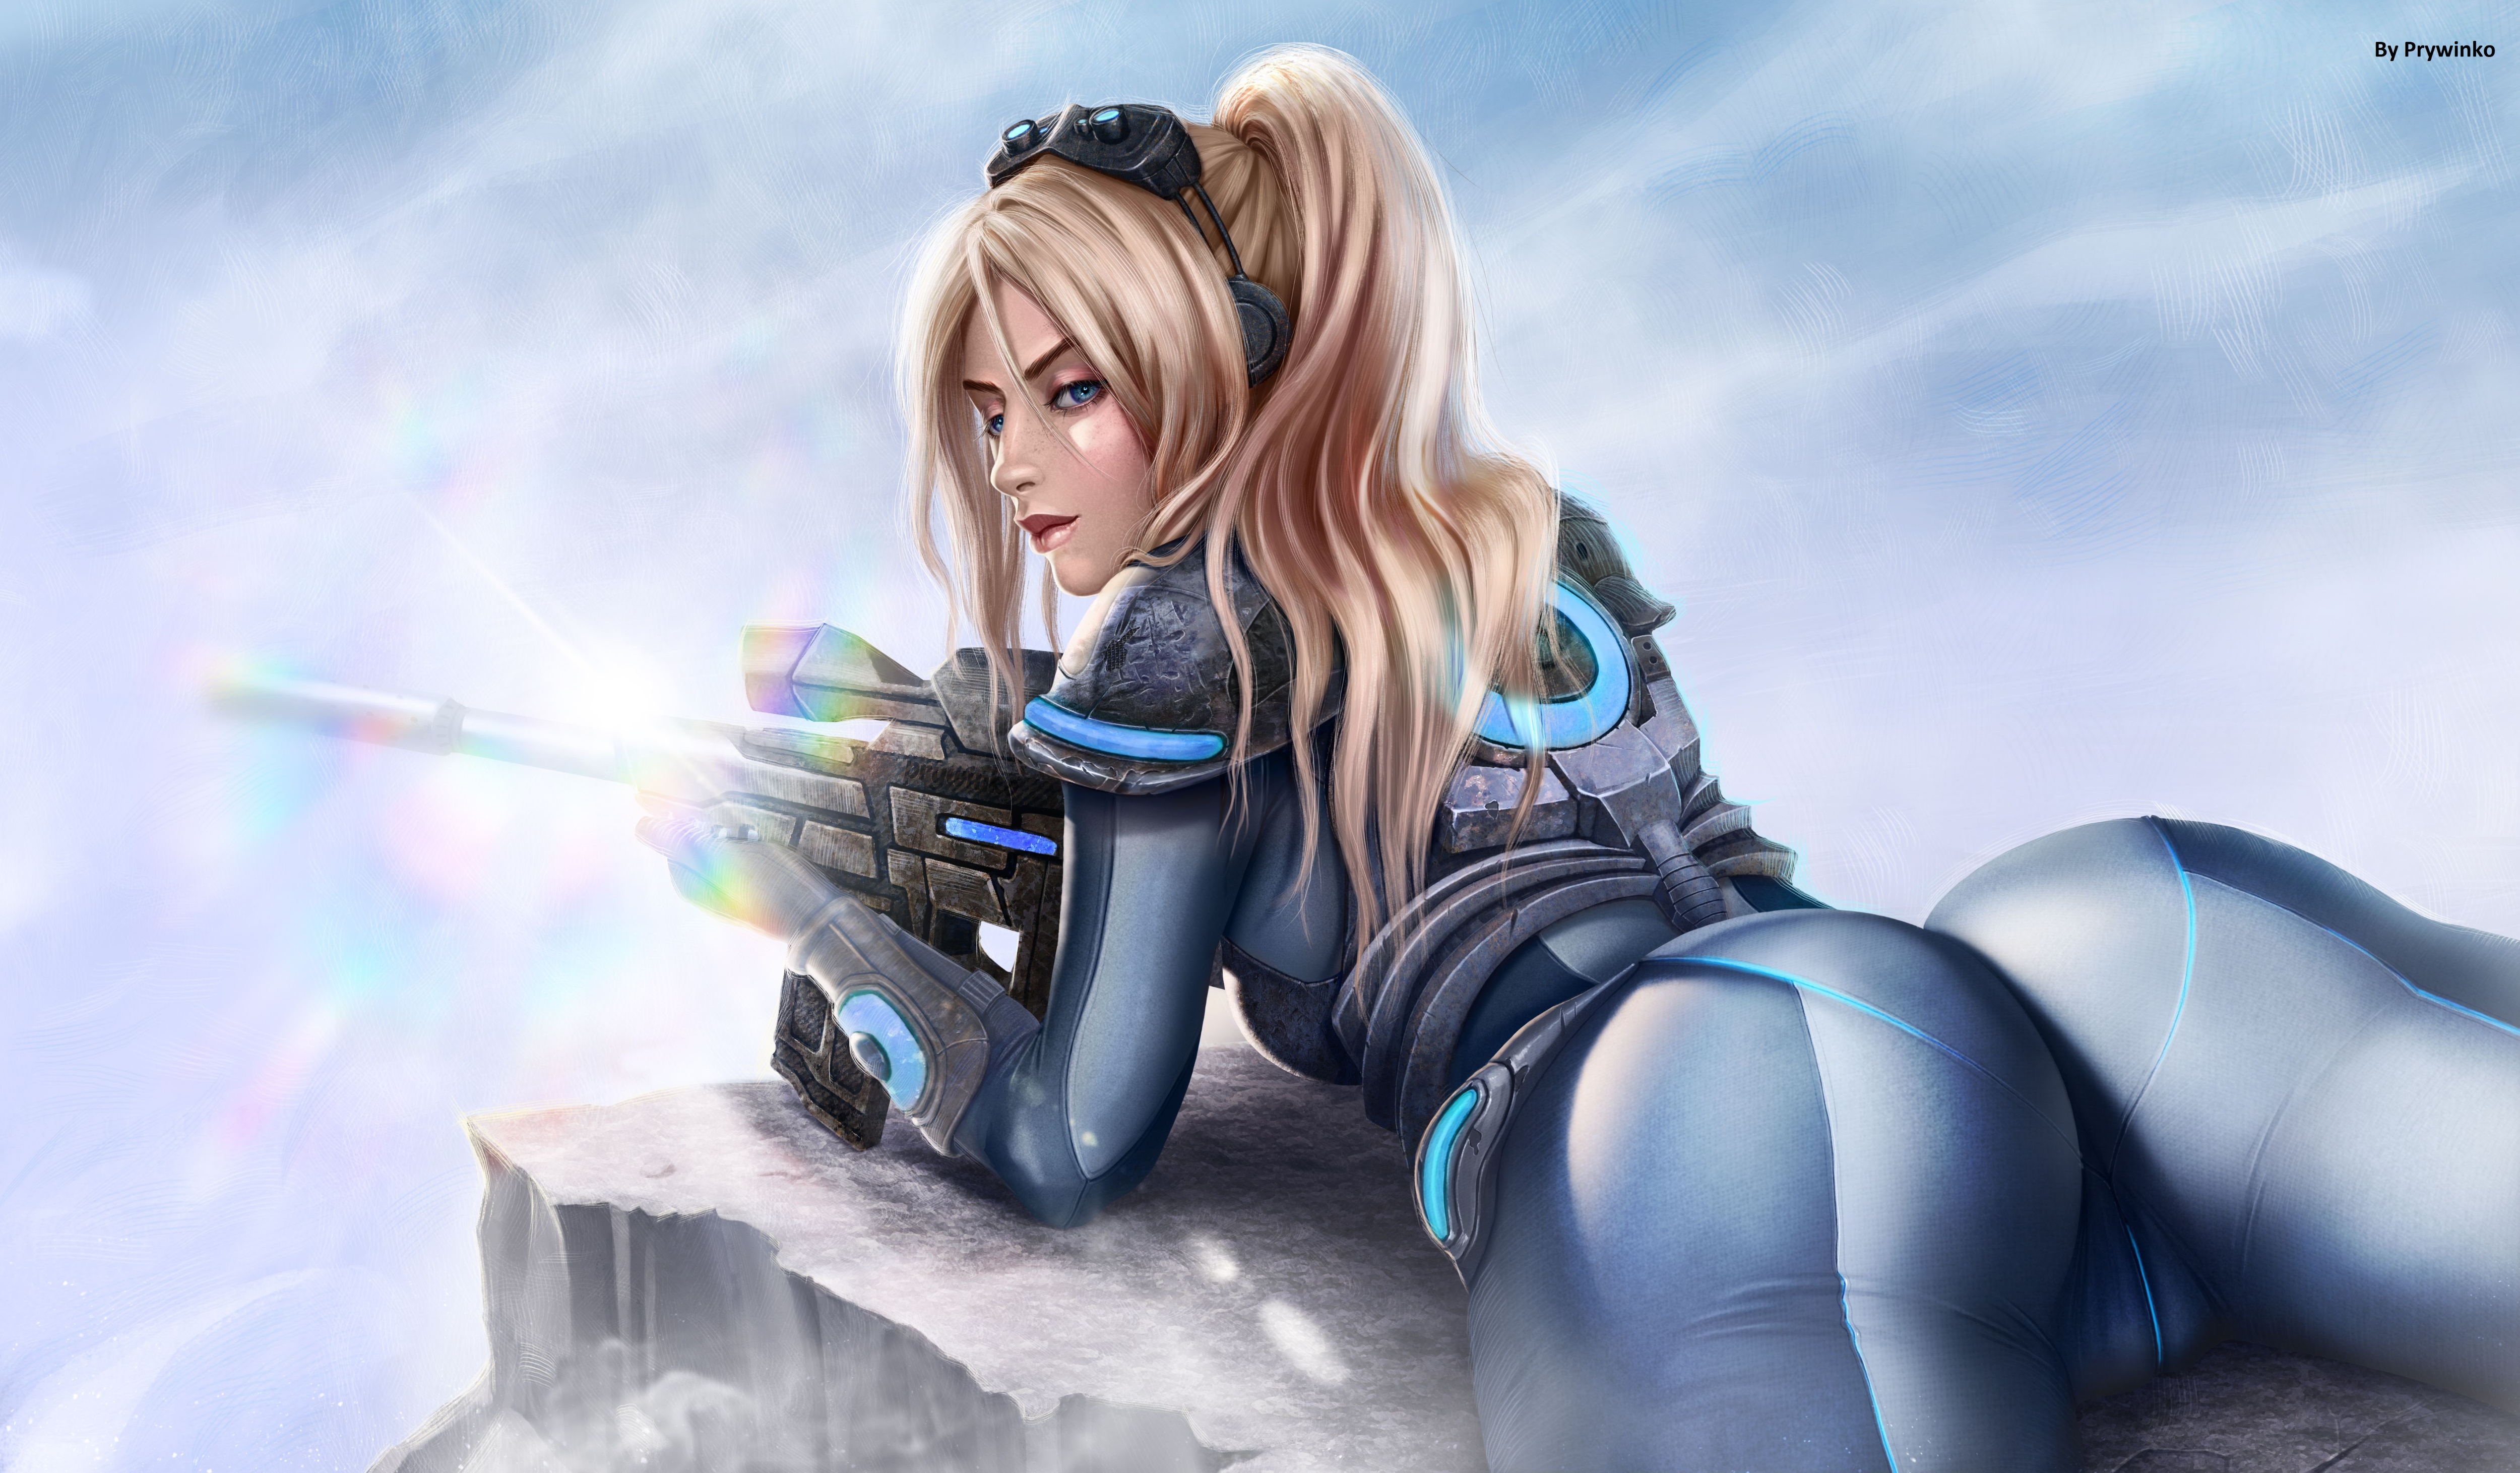 General 5000x2922 Nova (Starcraft) StarCraft video games video game characters ponytail blonde blue eyes looking at viewer rifles sniper rifle weapon armor tight clothing sky ass rear view video game girls artwork drawing digital art fan art Prywinko lens flare curvy bright